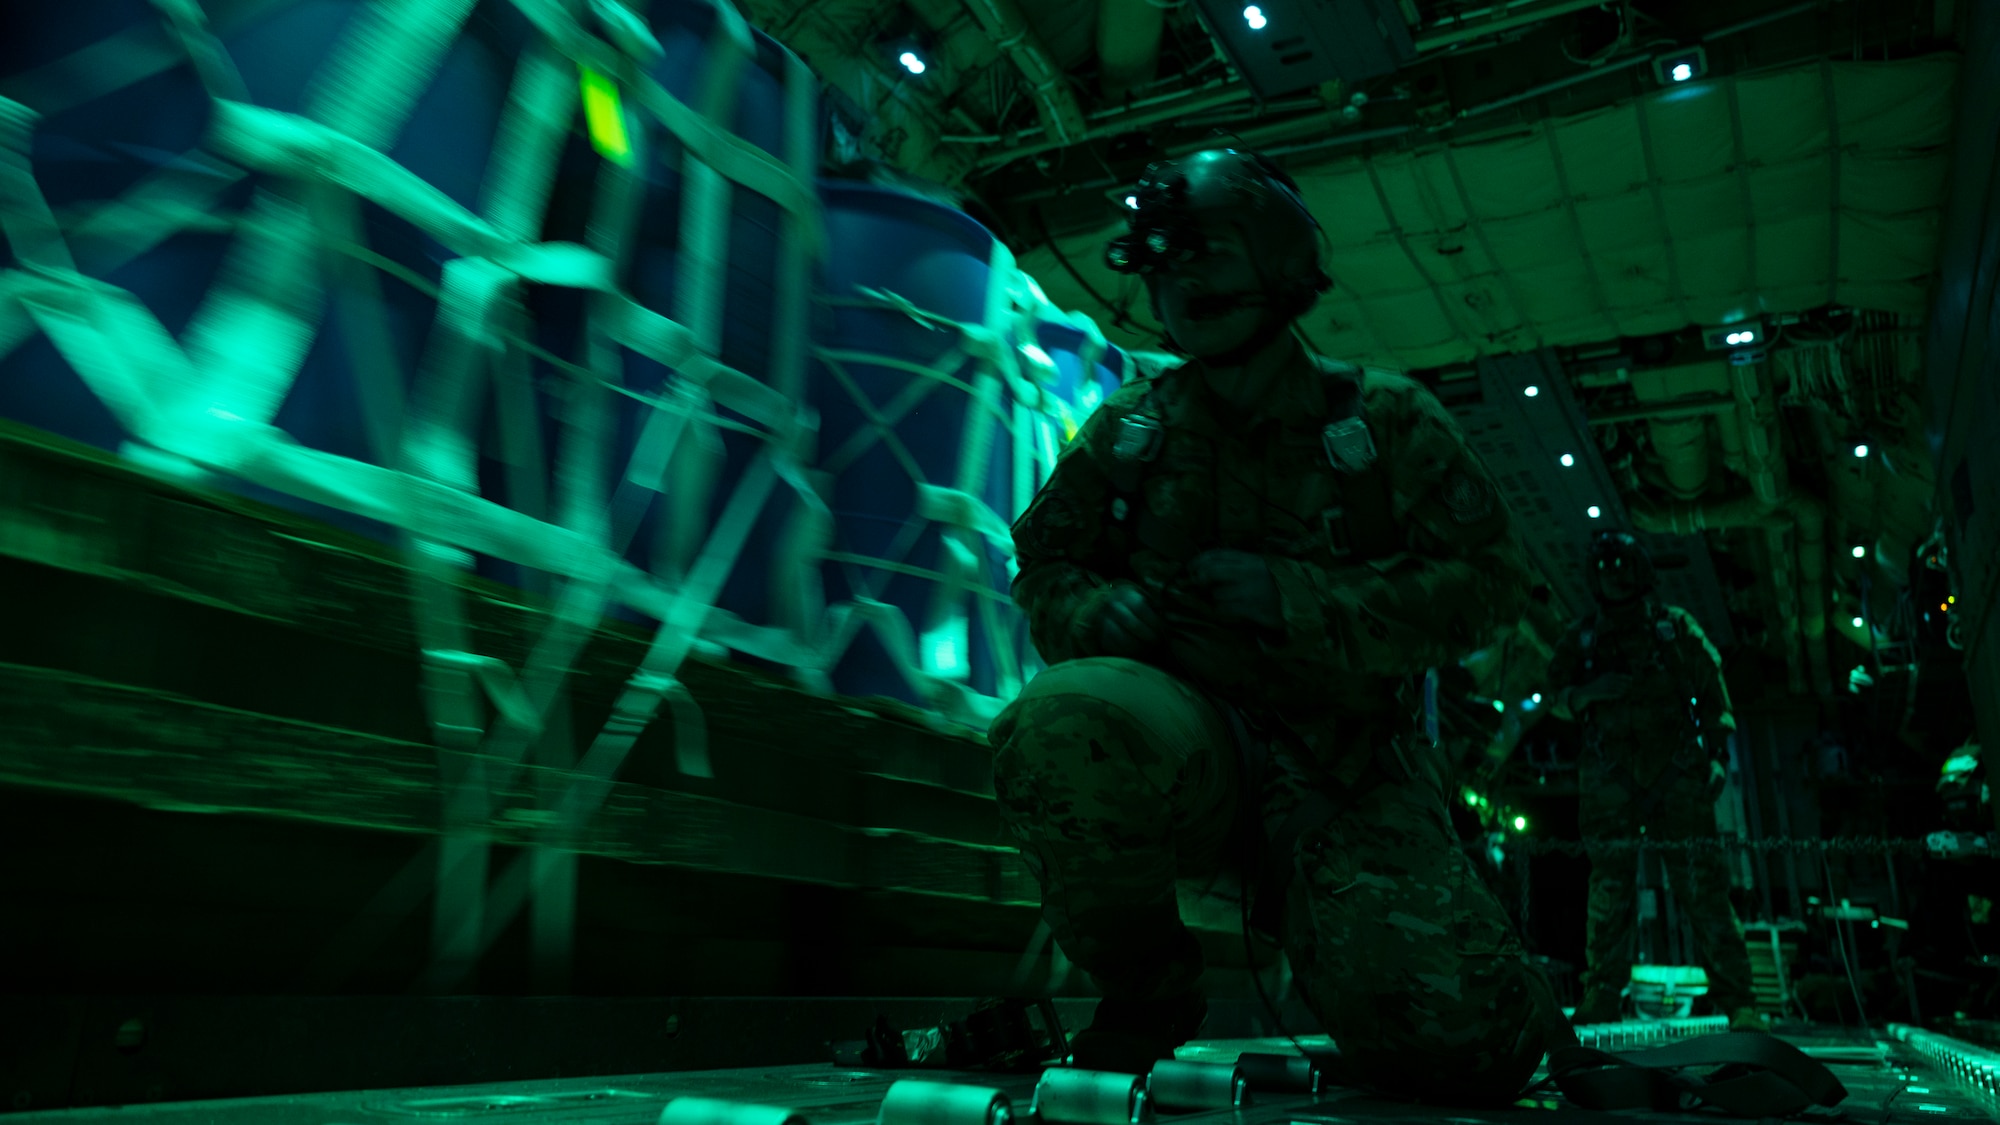 A loadmaster cuts the restraint of a container delivery system